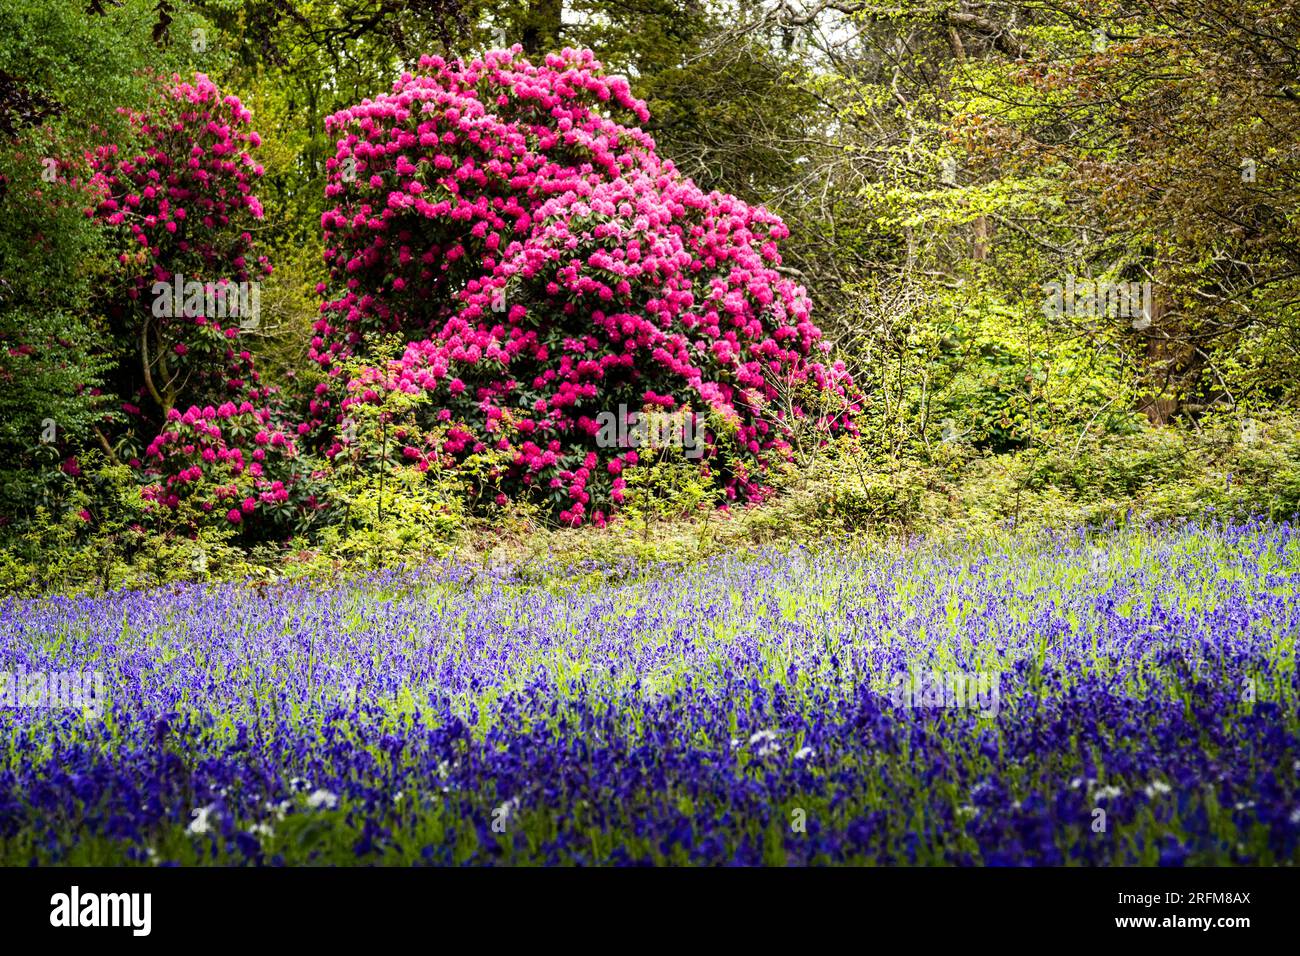 Stunning Rhododendrons Russellianum Cornish Red growing next to a field of Common English Bluebells Hyacinthoides Enys Garden. Stock Photo